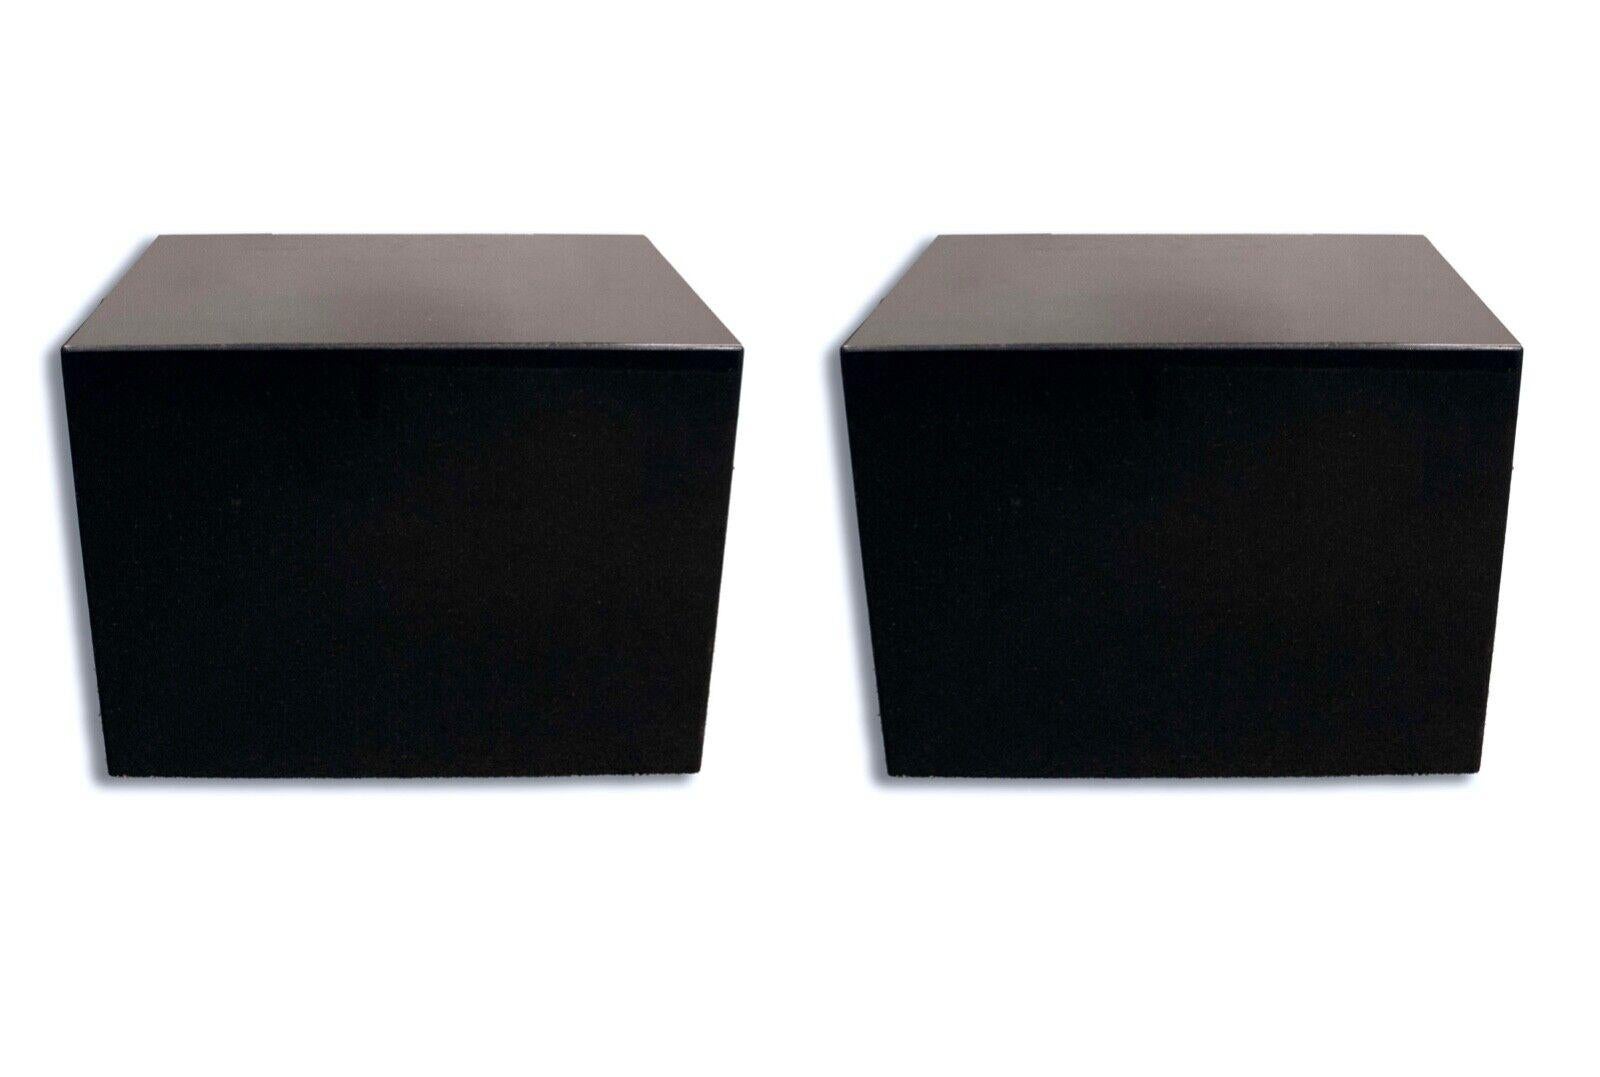 Introducing a pair of exquisite black granite end cube tables that exude sophistication and modernity. These tables are crafted from high-quality black granite, known for its durability and timeless elegance. With their clean lines and minimalist